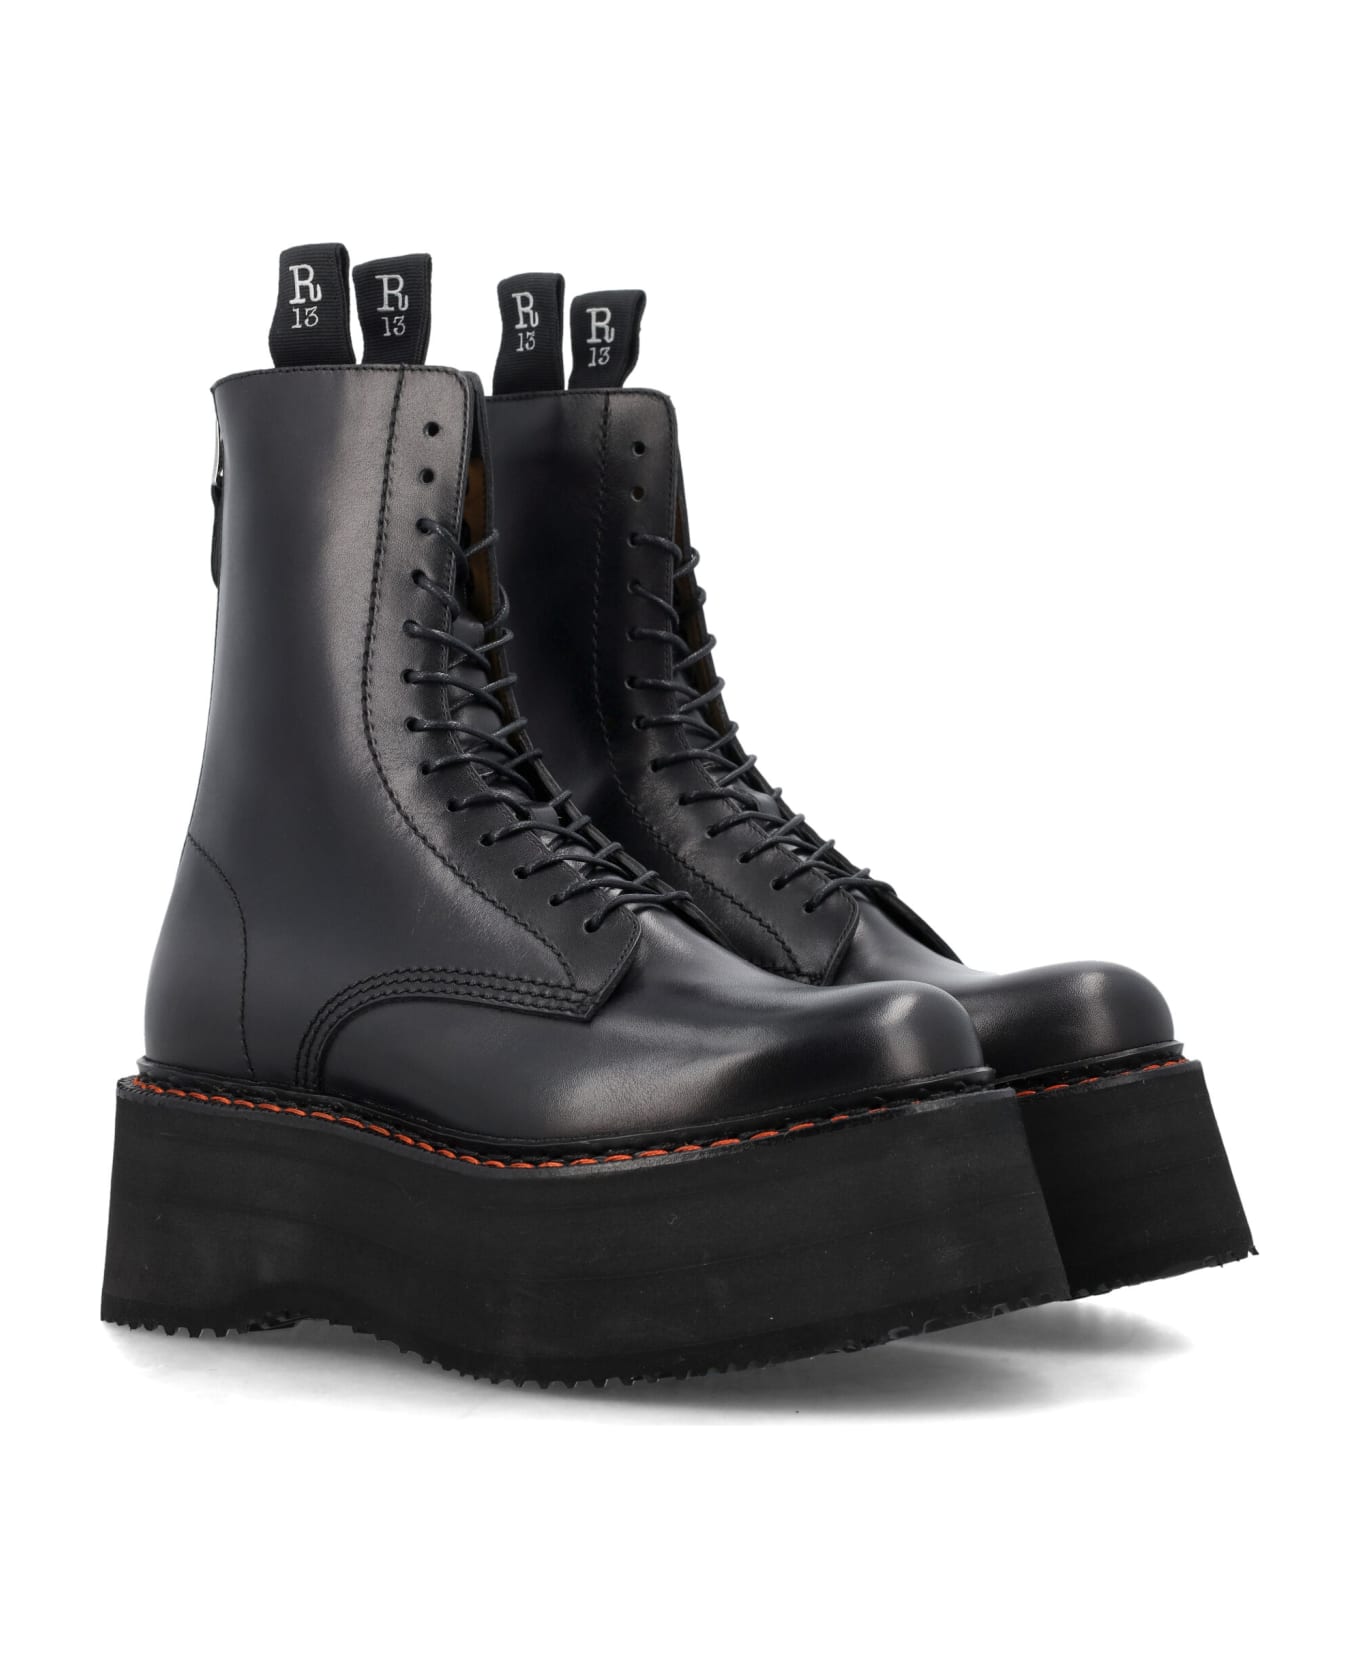 R13 Stack Boots - BLACK